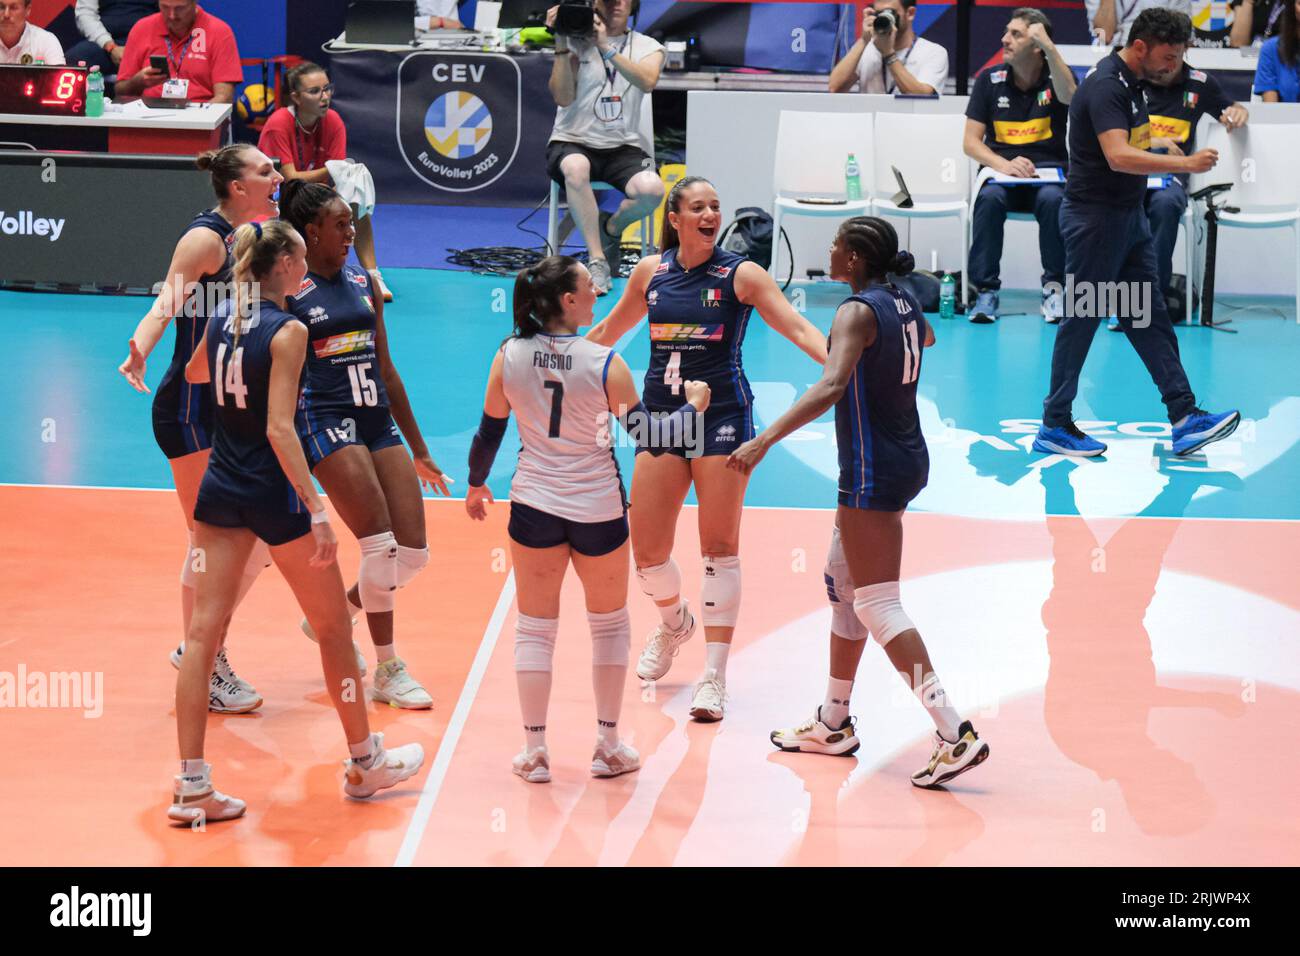 Turin, Italy. 22nd Aug, 2023. Italy National Team celebrates during the Final Round Day 7 of the Women's CEV Eurovolley 2023 between Italy vs Bosnia & Herzegovina. Italy national team beats Bosnia & Herzegovina with a score 3-0 (Photo by Davide Di Lalla/SOPA Images/Sipa USA) Credit: Sipa USA/Alamy Live News Stock Photo